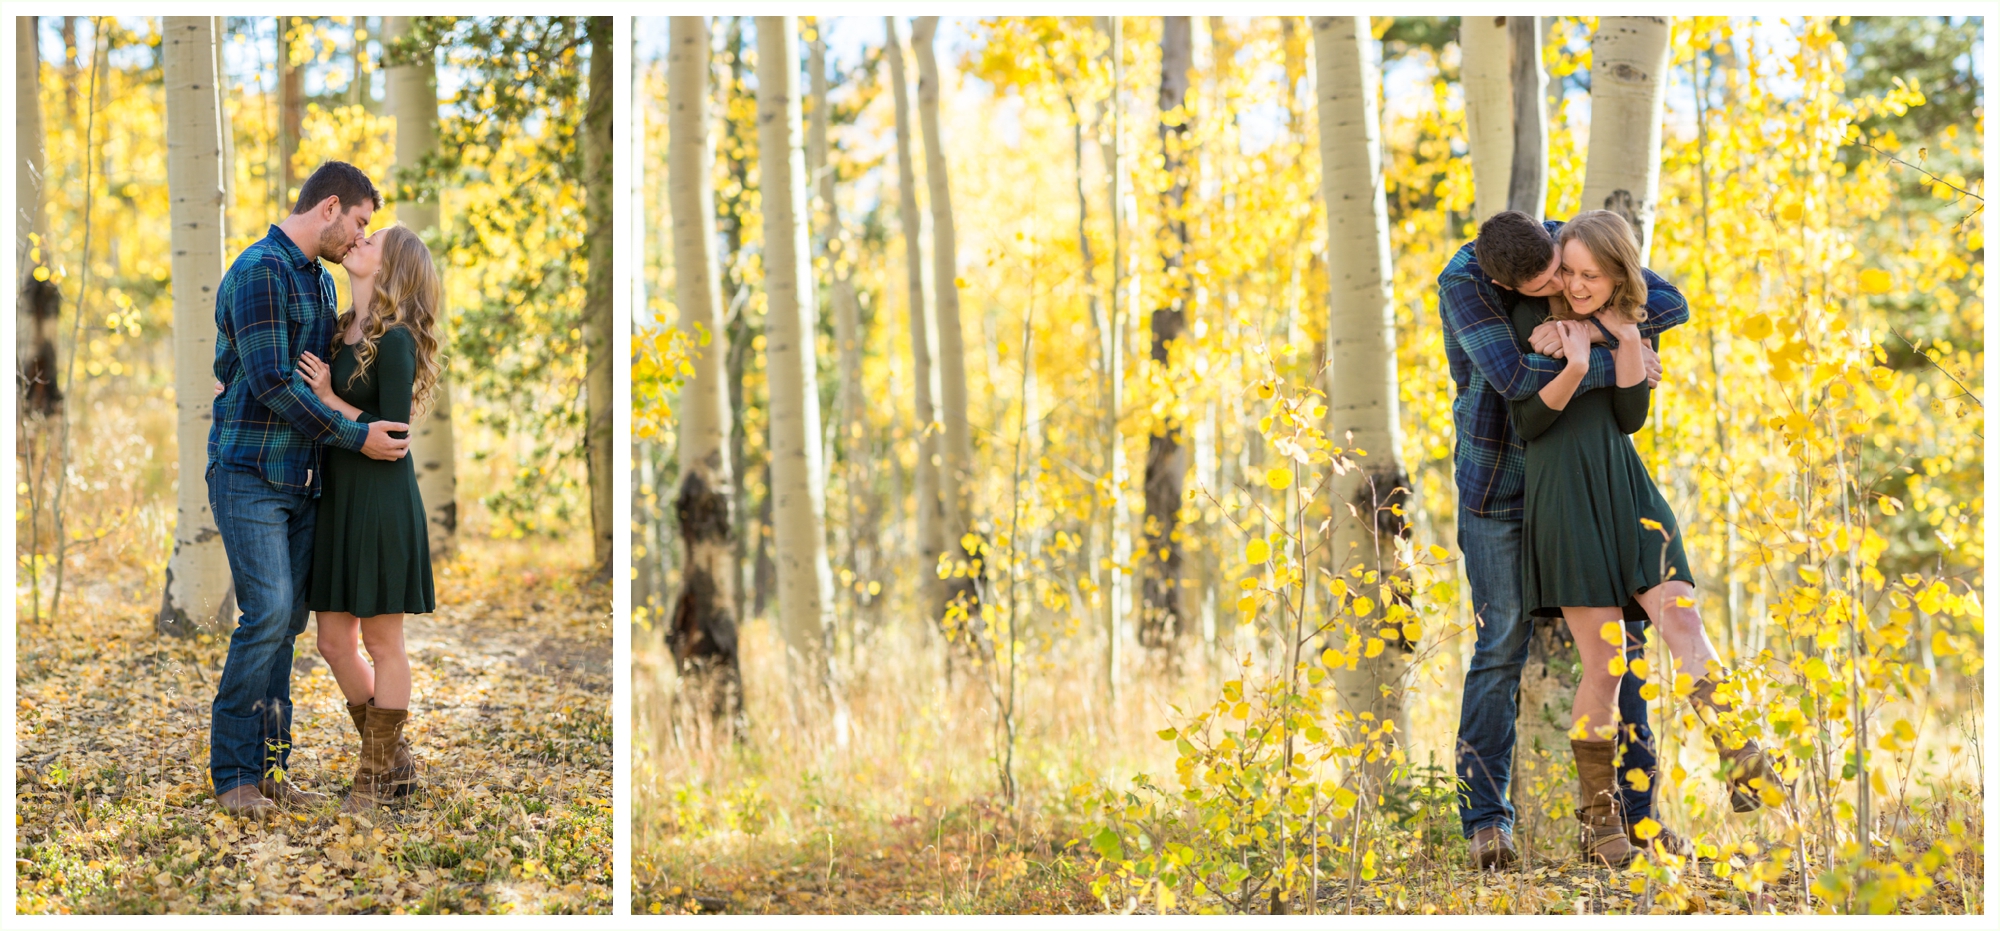 kenosha-pass-engagement-photos-fall-in-colorado-yellow-aspens-colorado-mountain-wedding-photographer-shoots-candid-portraits-in-september-autumn-outfit-inspiration-engagement-sessioncolorado-fall-engagement-session